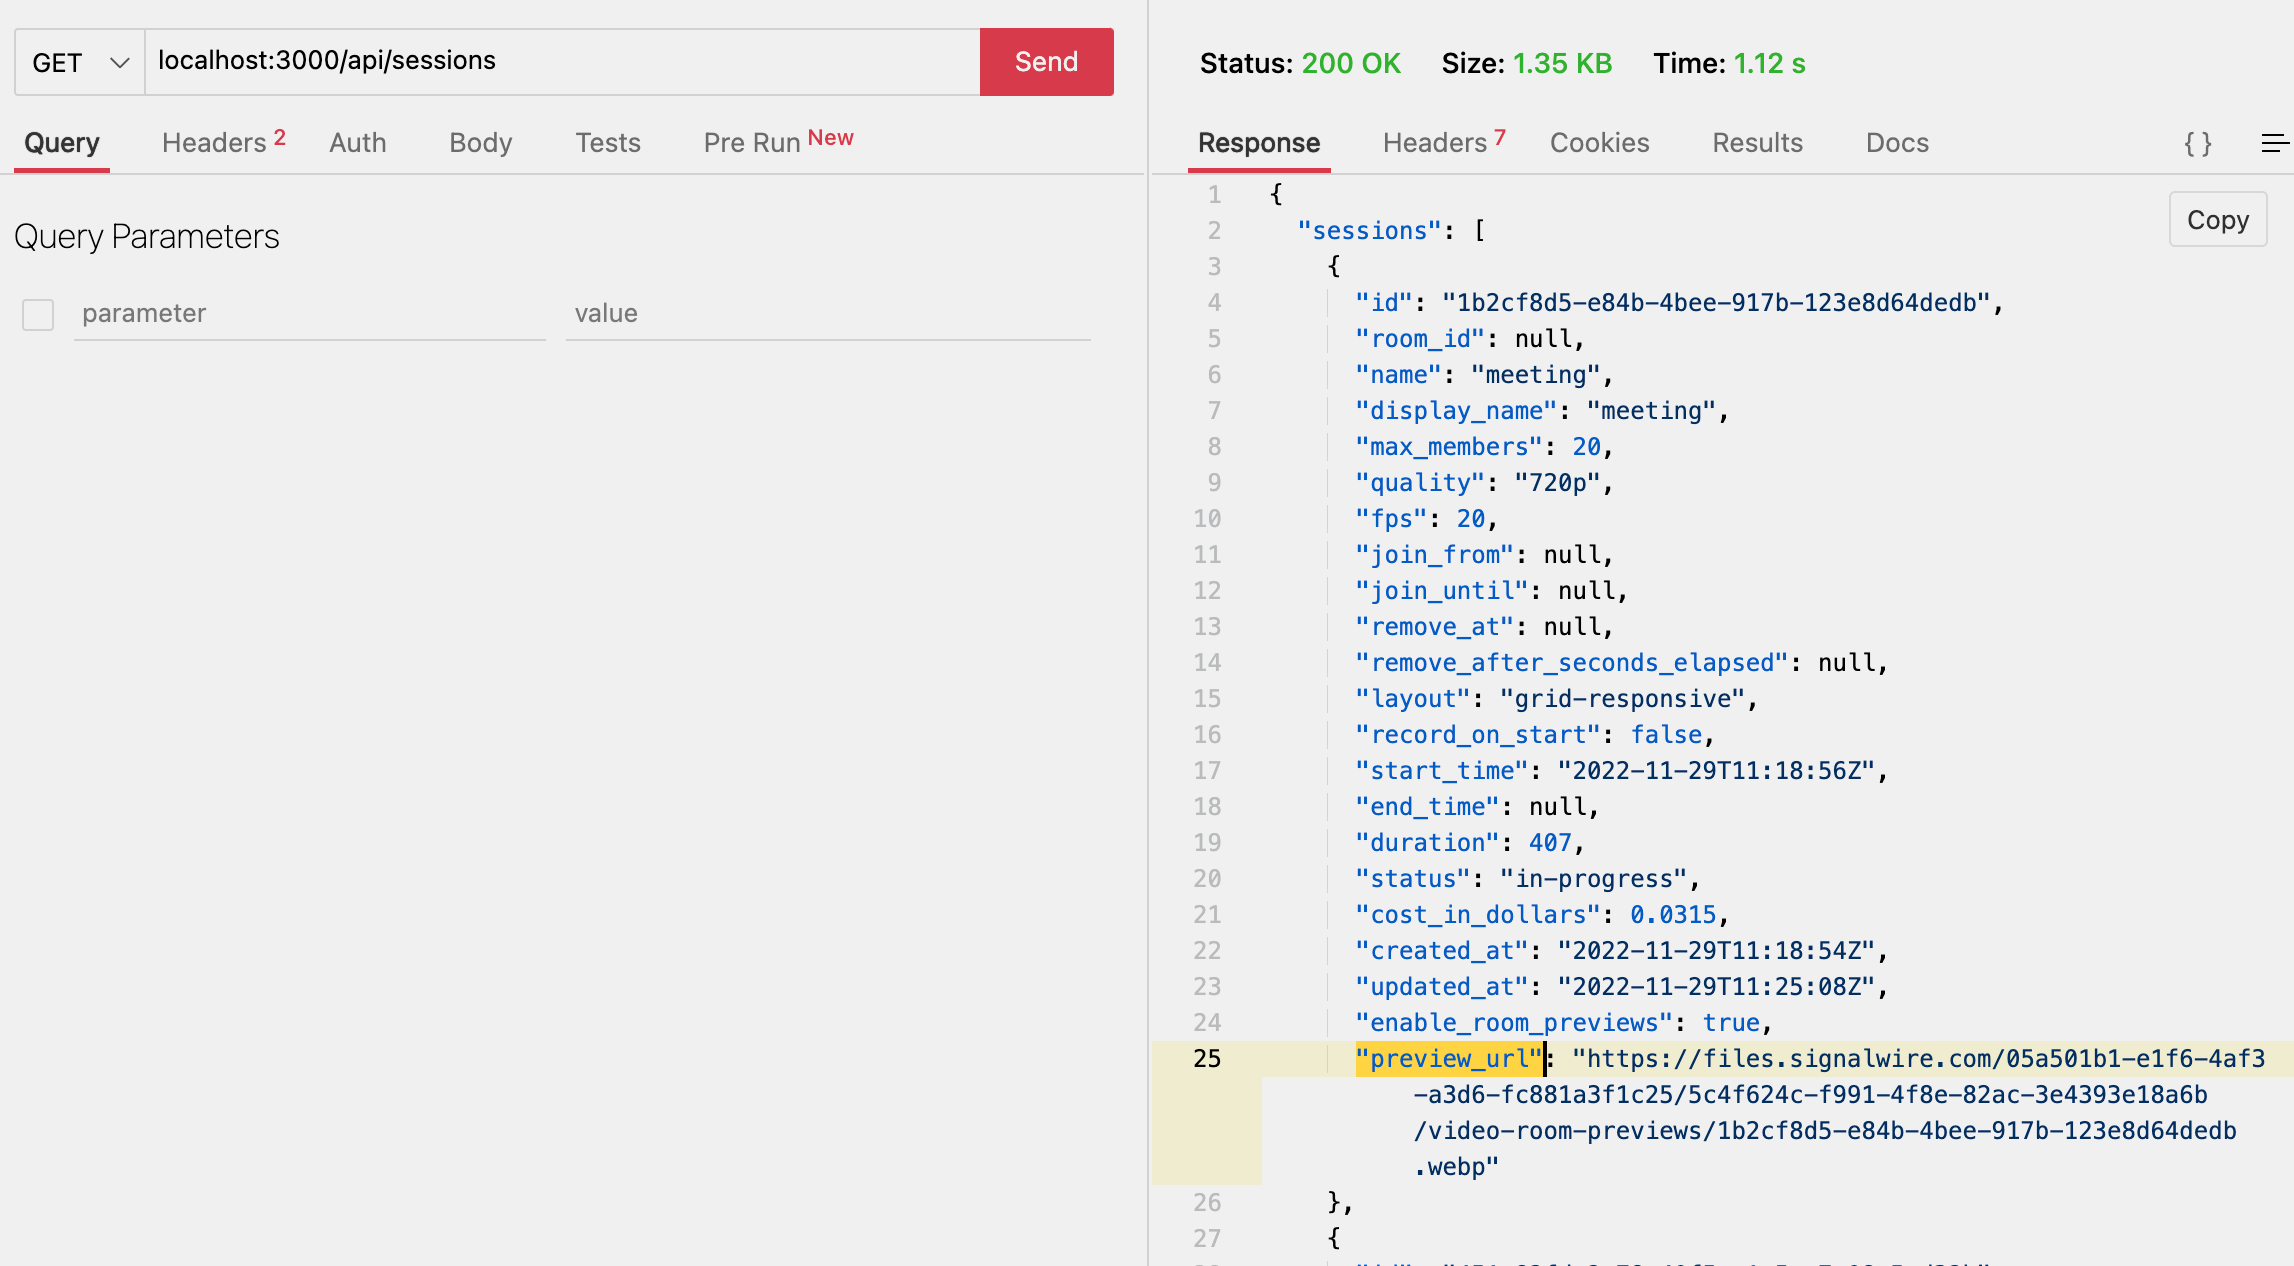 A screenshot of a GET query in Thunder Client. A GET request is being sent to /api/sessions.